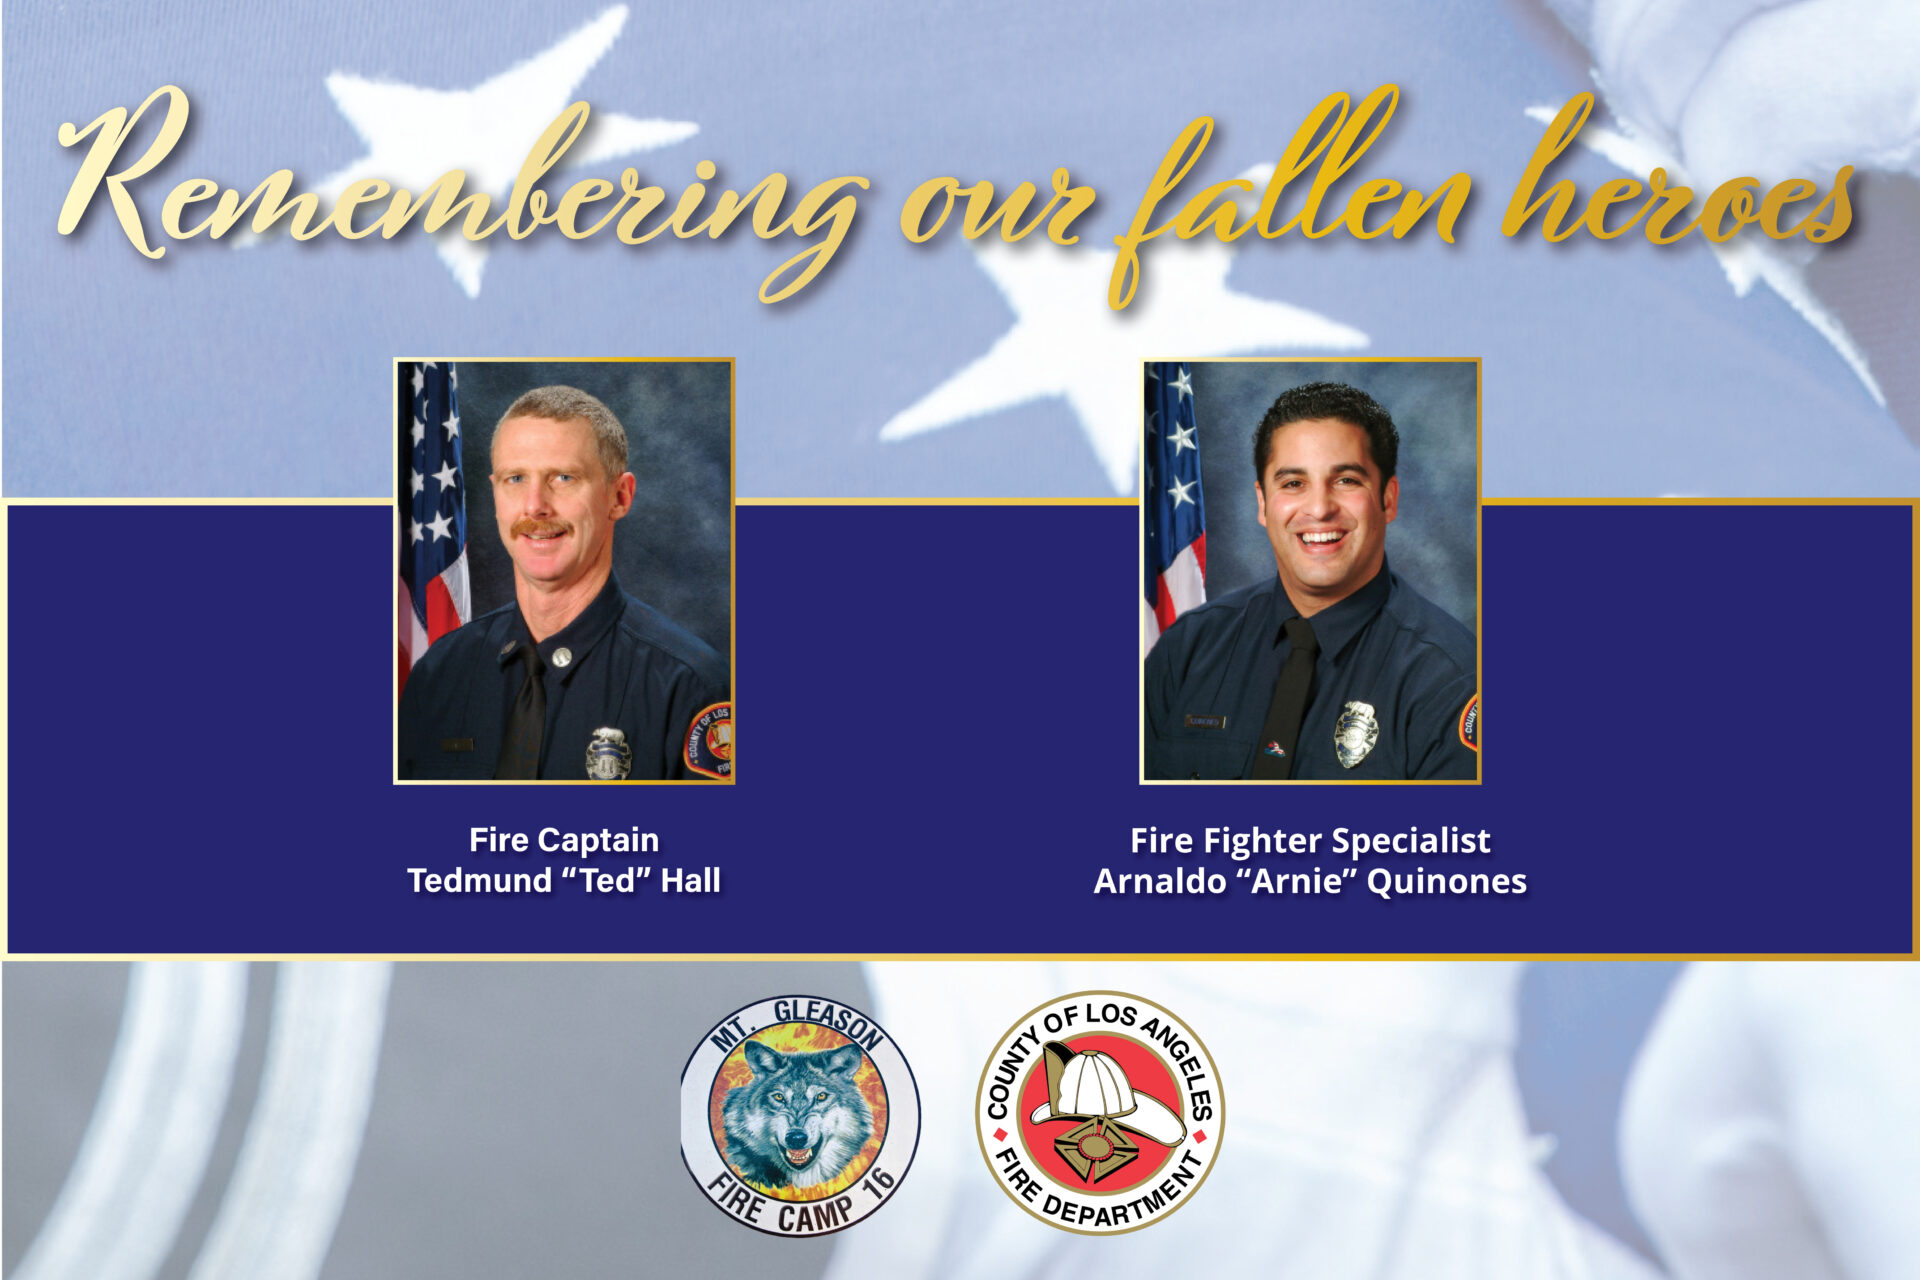 Wednesday, August 30, 2023, marked the 14-year anniversary of the line of duty deaths of Fire Captain Tedmund “Ted” Hall and Fire Fighter Specialist (FFS) Arnaldo “Arnie” Quinones.